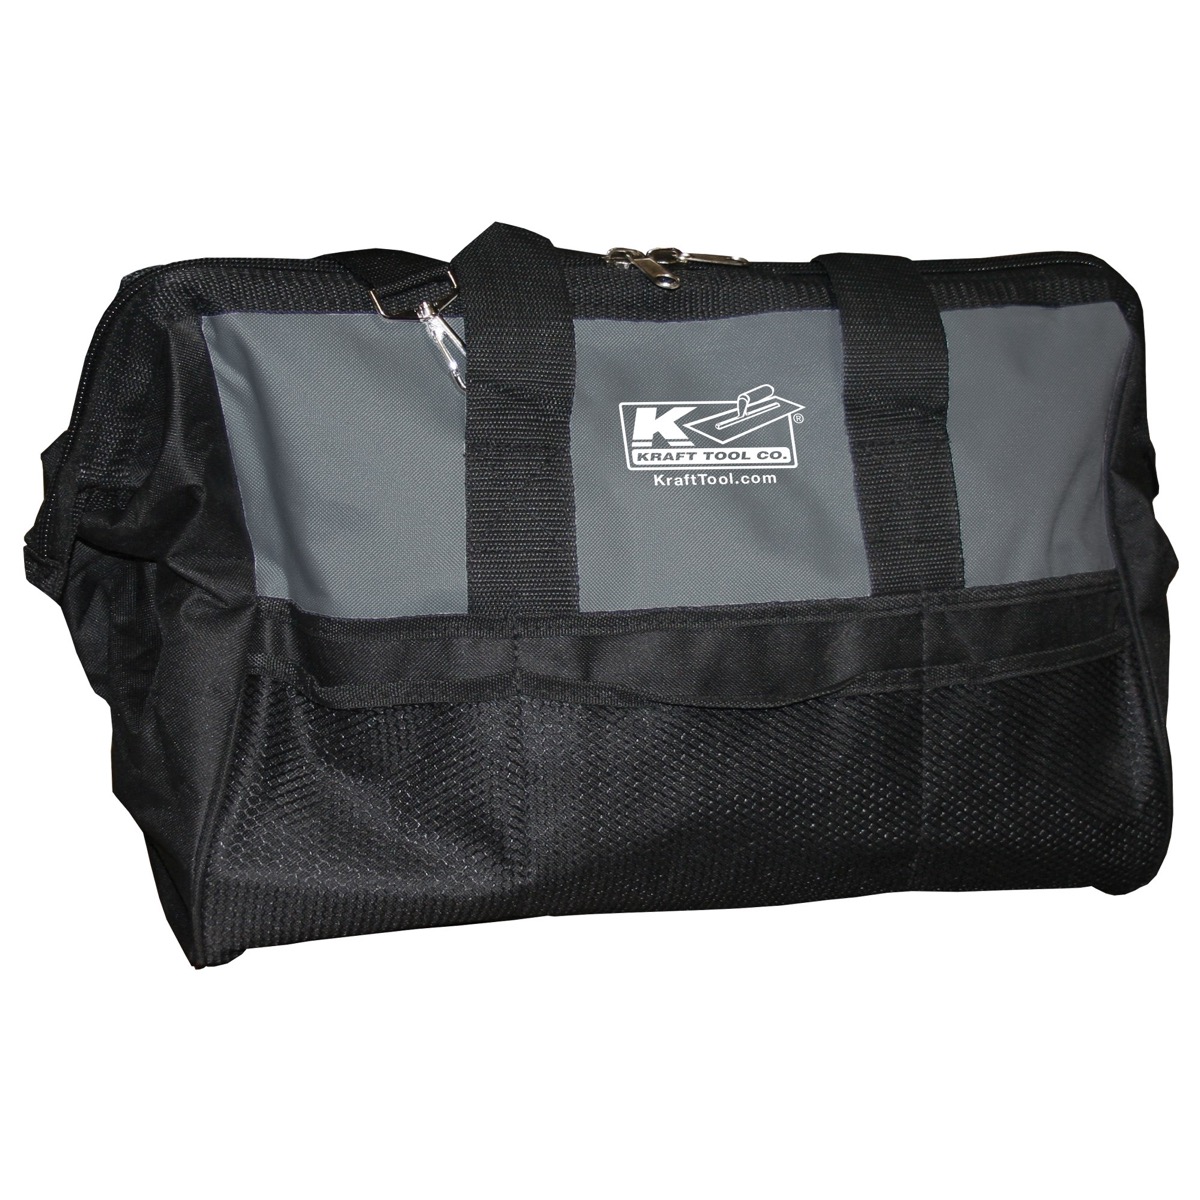 Polyester backed with PVC and a reinforced bottom make this light, but strong. Large zippered opening on this 20" x 8-1/2" bag easily fits tools and supplies inside. Available from Speedcrete, United Kingdom.